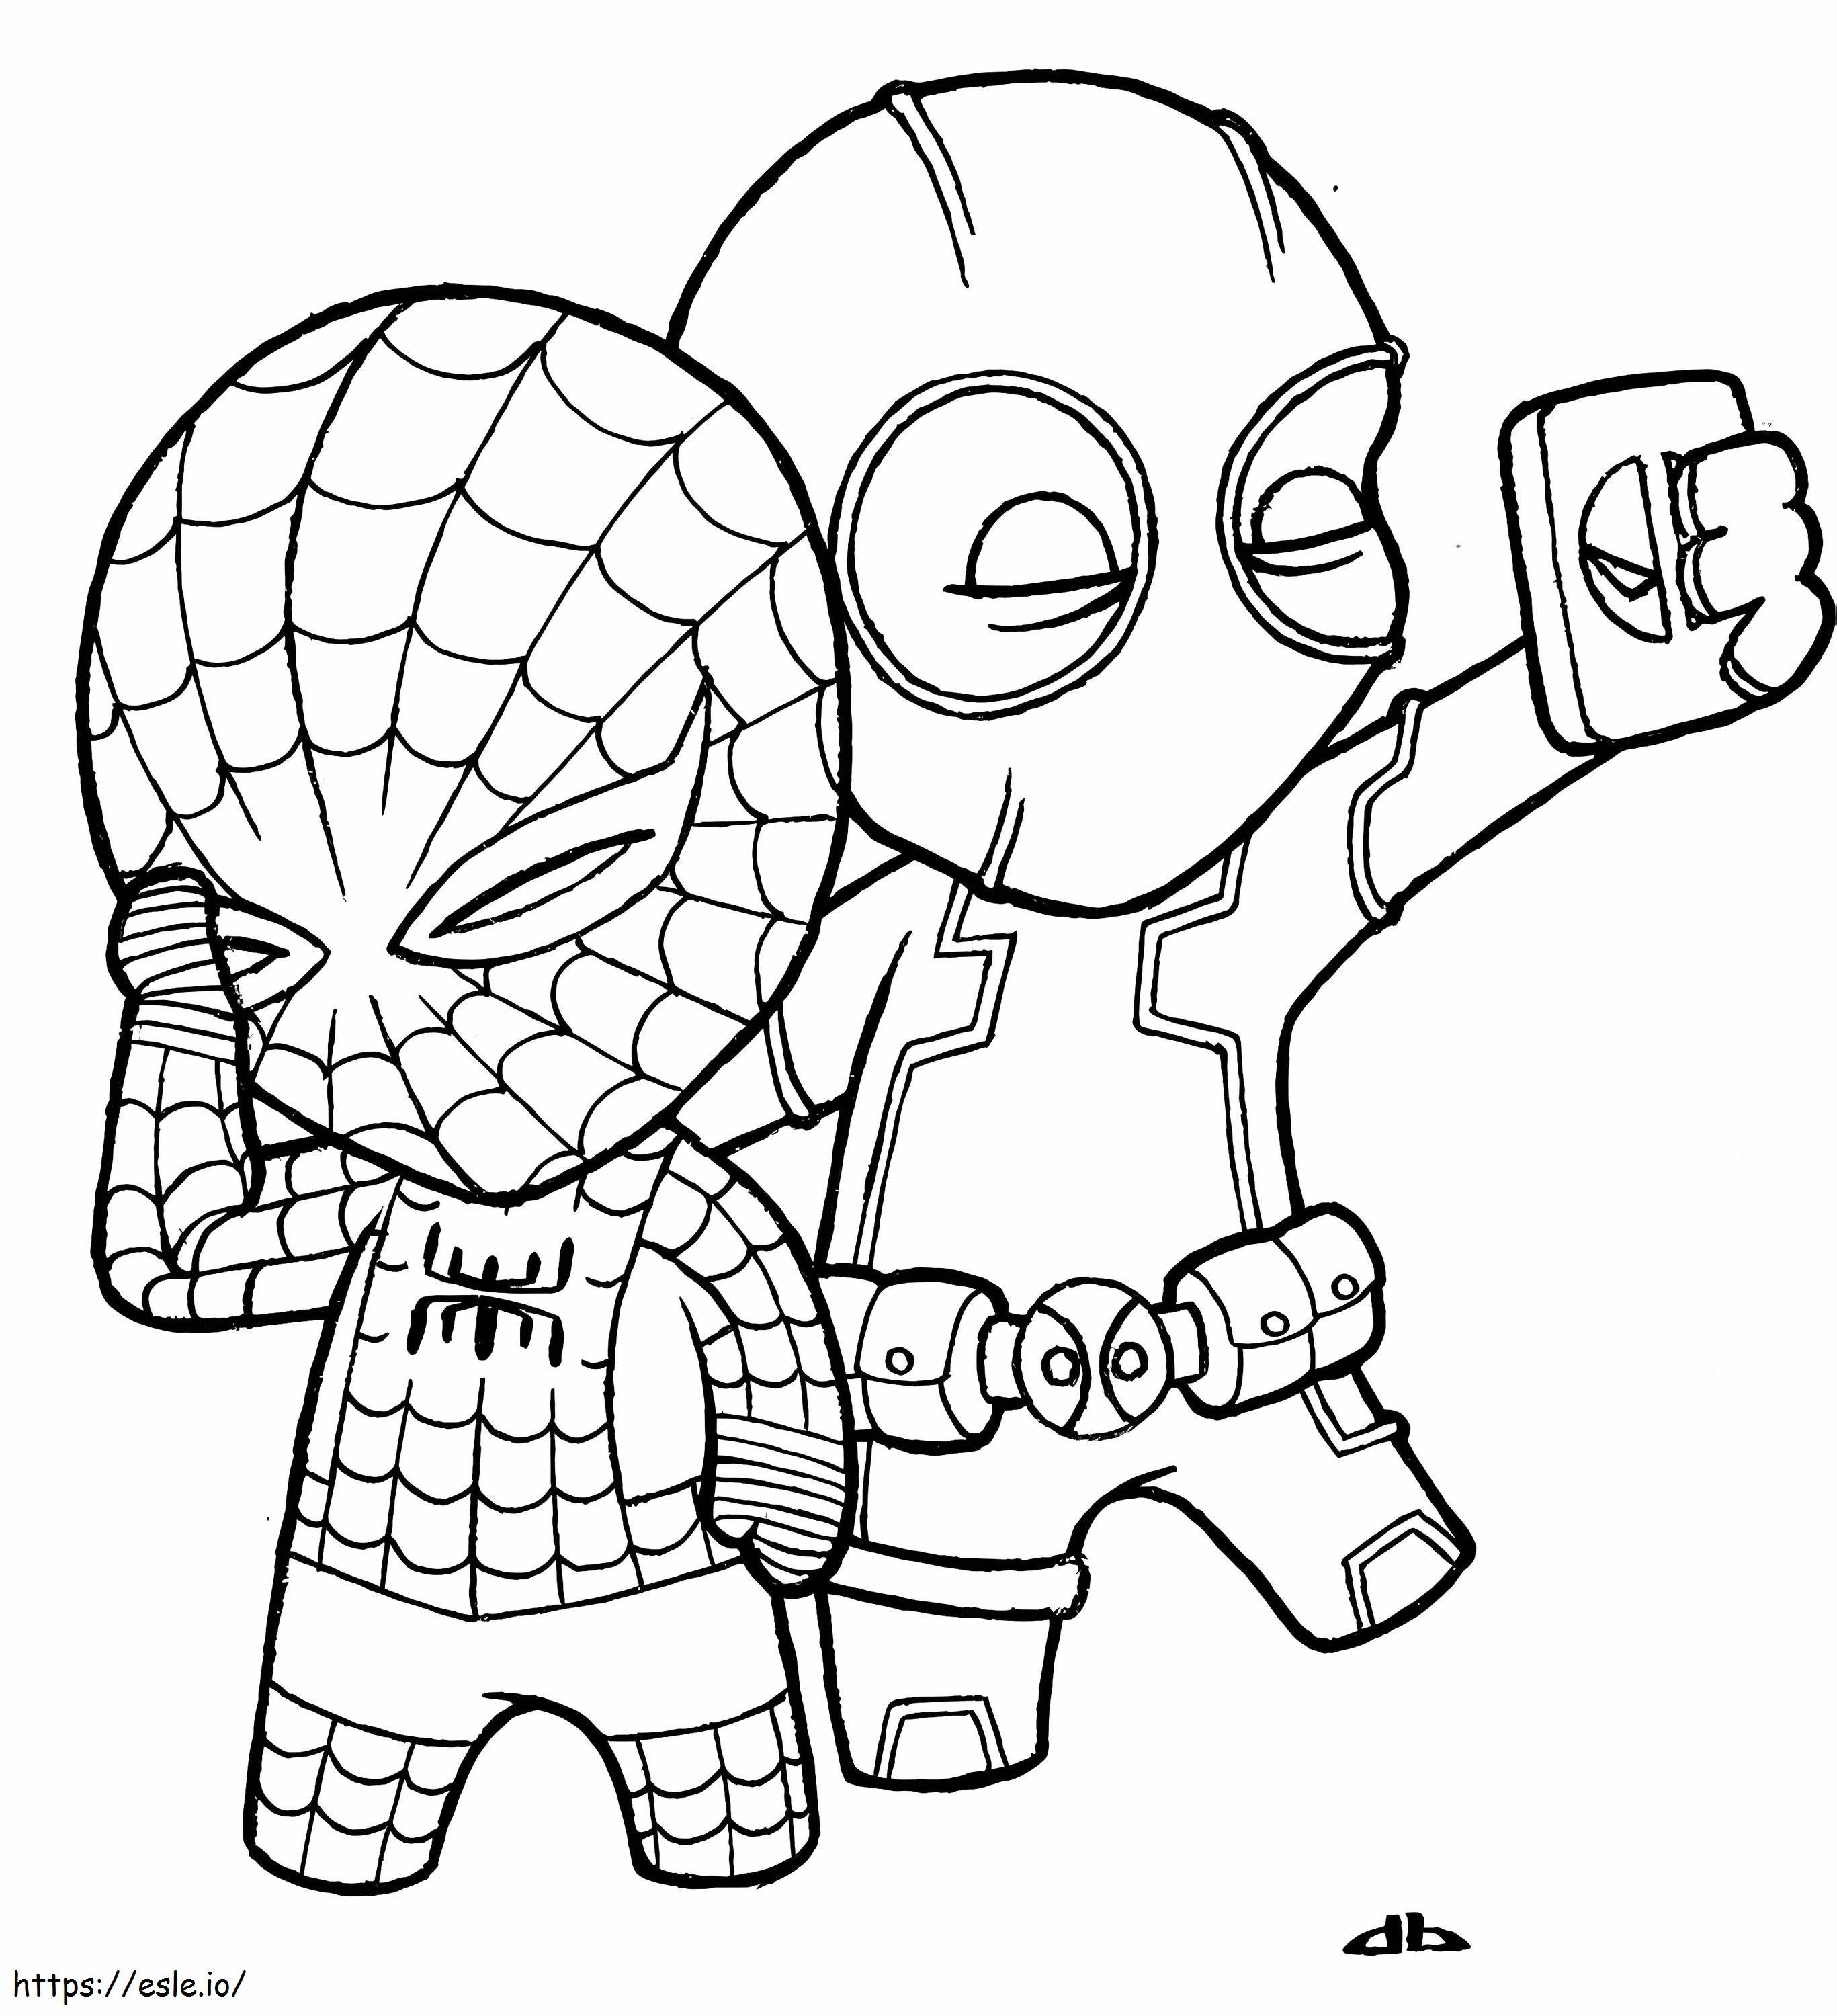 Best Chibi Spiderman With Deadpool Free 3570 Showy At Deadpool coloring page